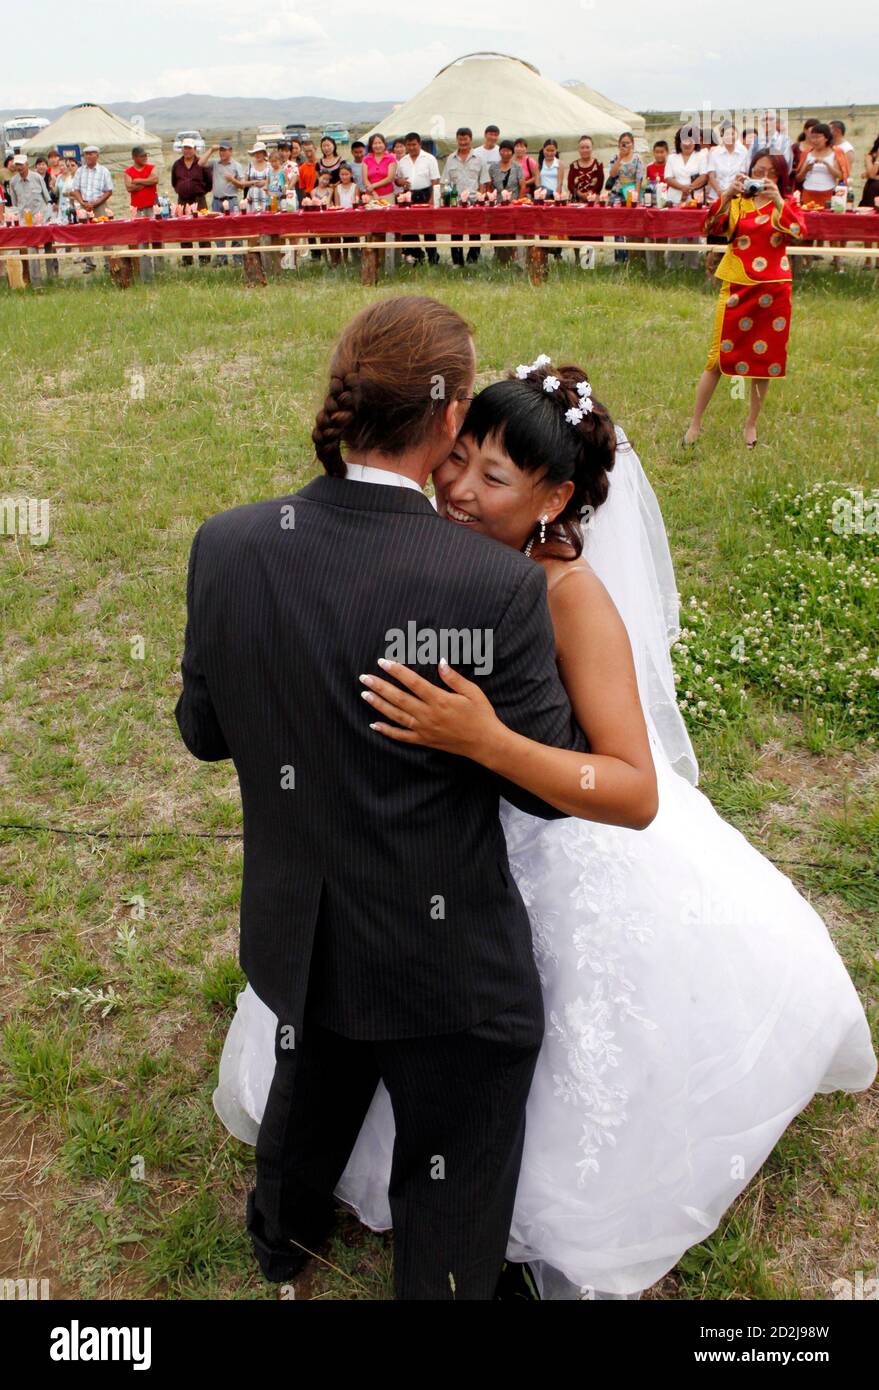 https://c8.alamy.com/comp/2D2J98W/sean-quirk-r-of-us-from-milwaukee-wisconsin-and-his-bride-chaiganmaa-ondar-originally-from-tuva-dance-during-their-open-air-wedding-ceremony-outside-the-city-of-kyzyl-in-the-tuva-region-on-the-mongolian-border-some-736-km-457-miles-south-of-the-siberian-city-of-krasnoyarsk-july-18-2010-quirk-inspired-by-tuvan-throat-singing-moved-from-the-united-states-to-russias-tuva-region-seven-years-ago-where-he-is-currently-a-member-of-the-tuvan-national-orchestra-and-in-2008-was-named-a-merited-artist-of-tuva-for-his-work-on-behalf-of-tuvan-music-and-culture-reutersilya-naymushin-2D2J98W.jpg